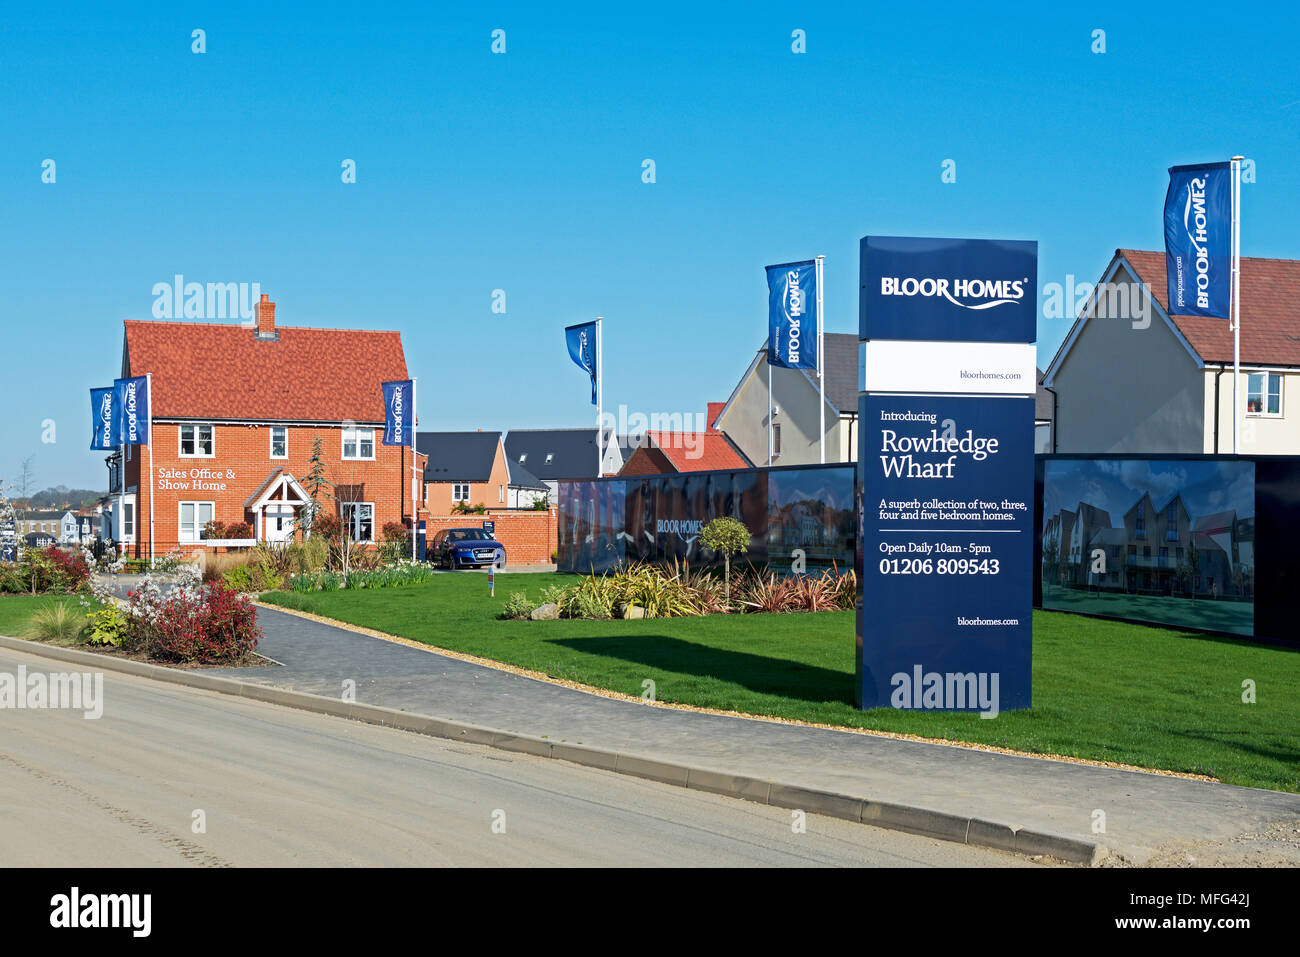 New houses built by Bloor, Rowhedge Wharf, Essex, England UK Stock Photo